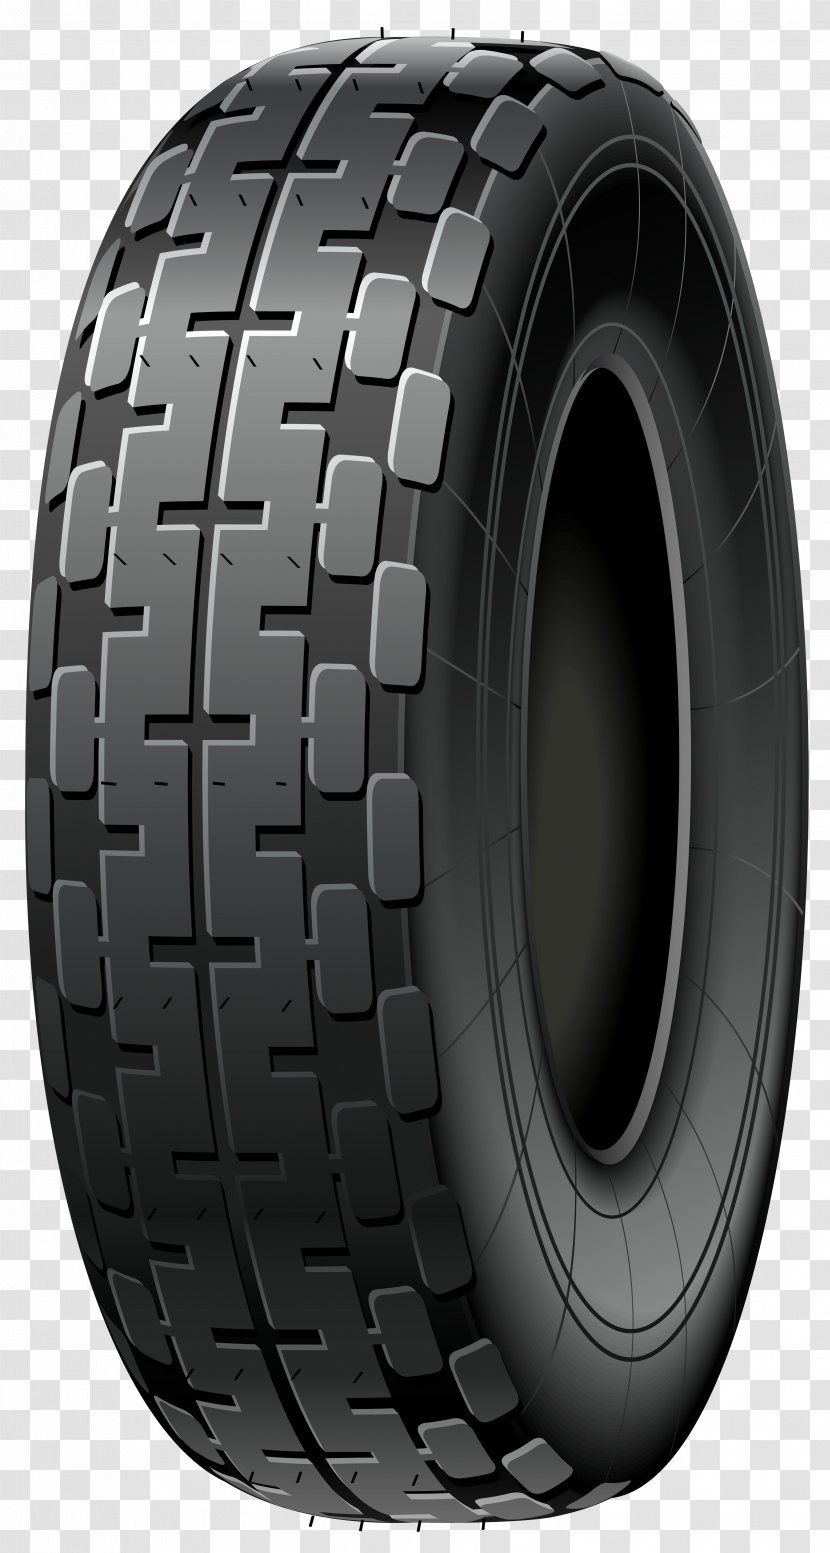 Car Goodyear Tire And Rubber Company Tread - Dunlop Tyres Transparent PNG